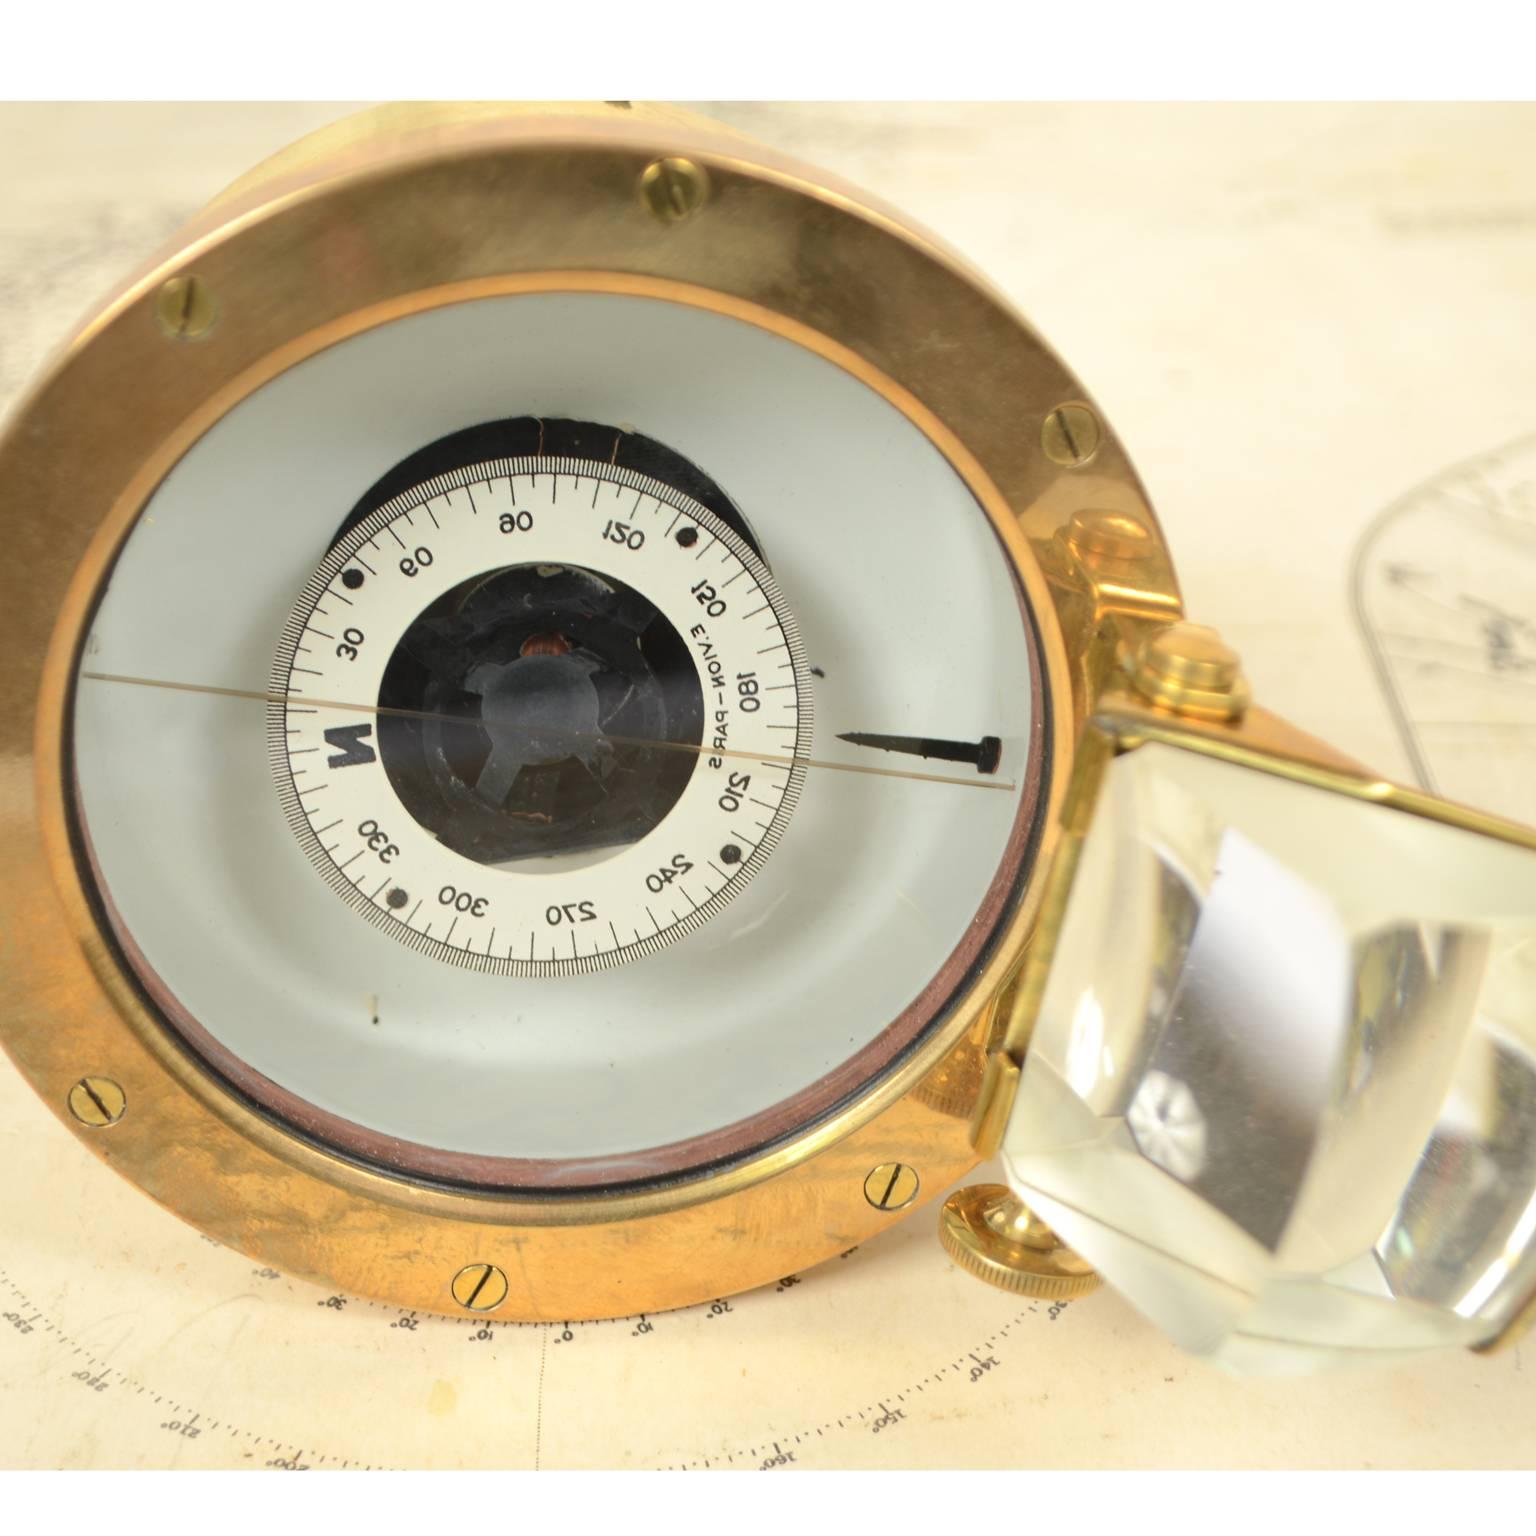 Nautical Brass Magnetic Compass with Original Box by E. Vion Paris, Early 1900 For Sale 9